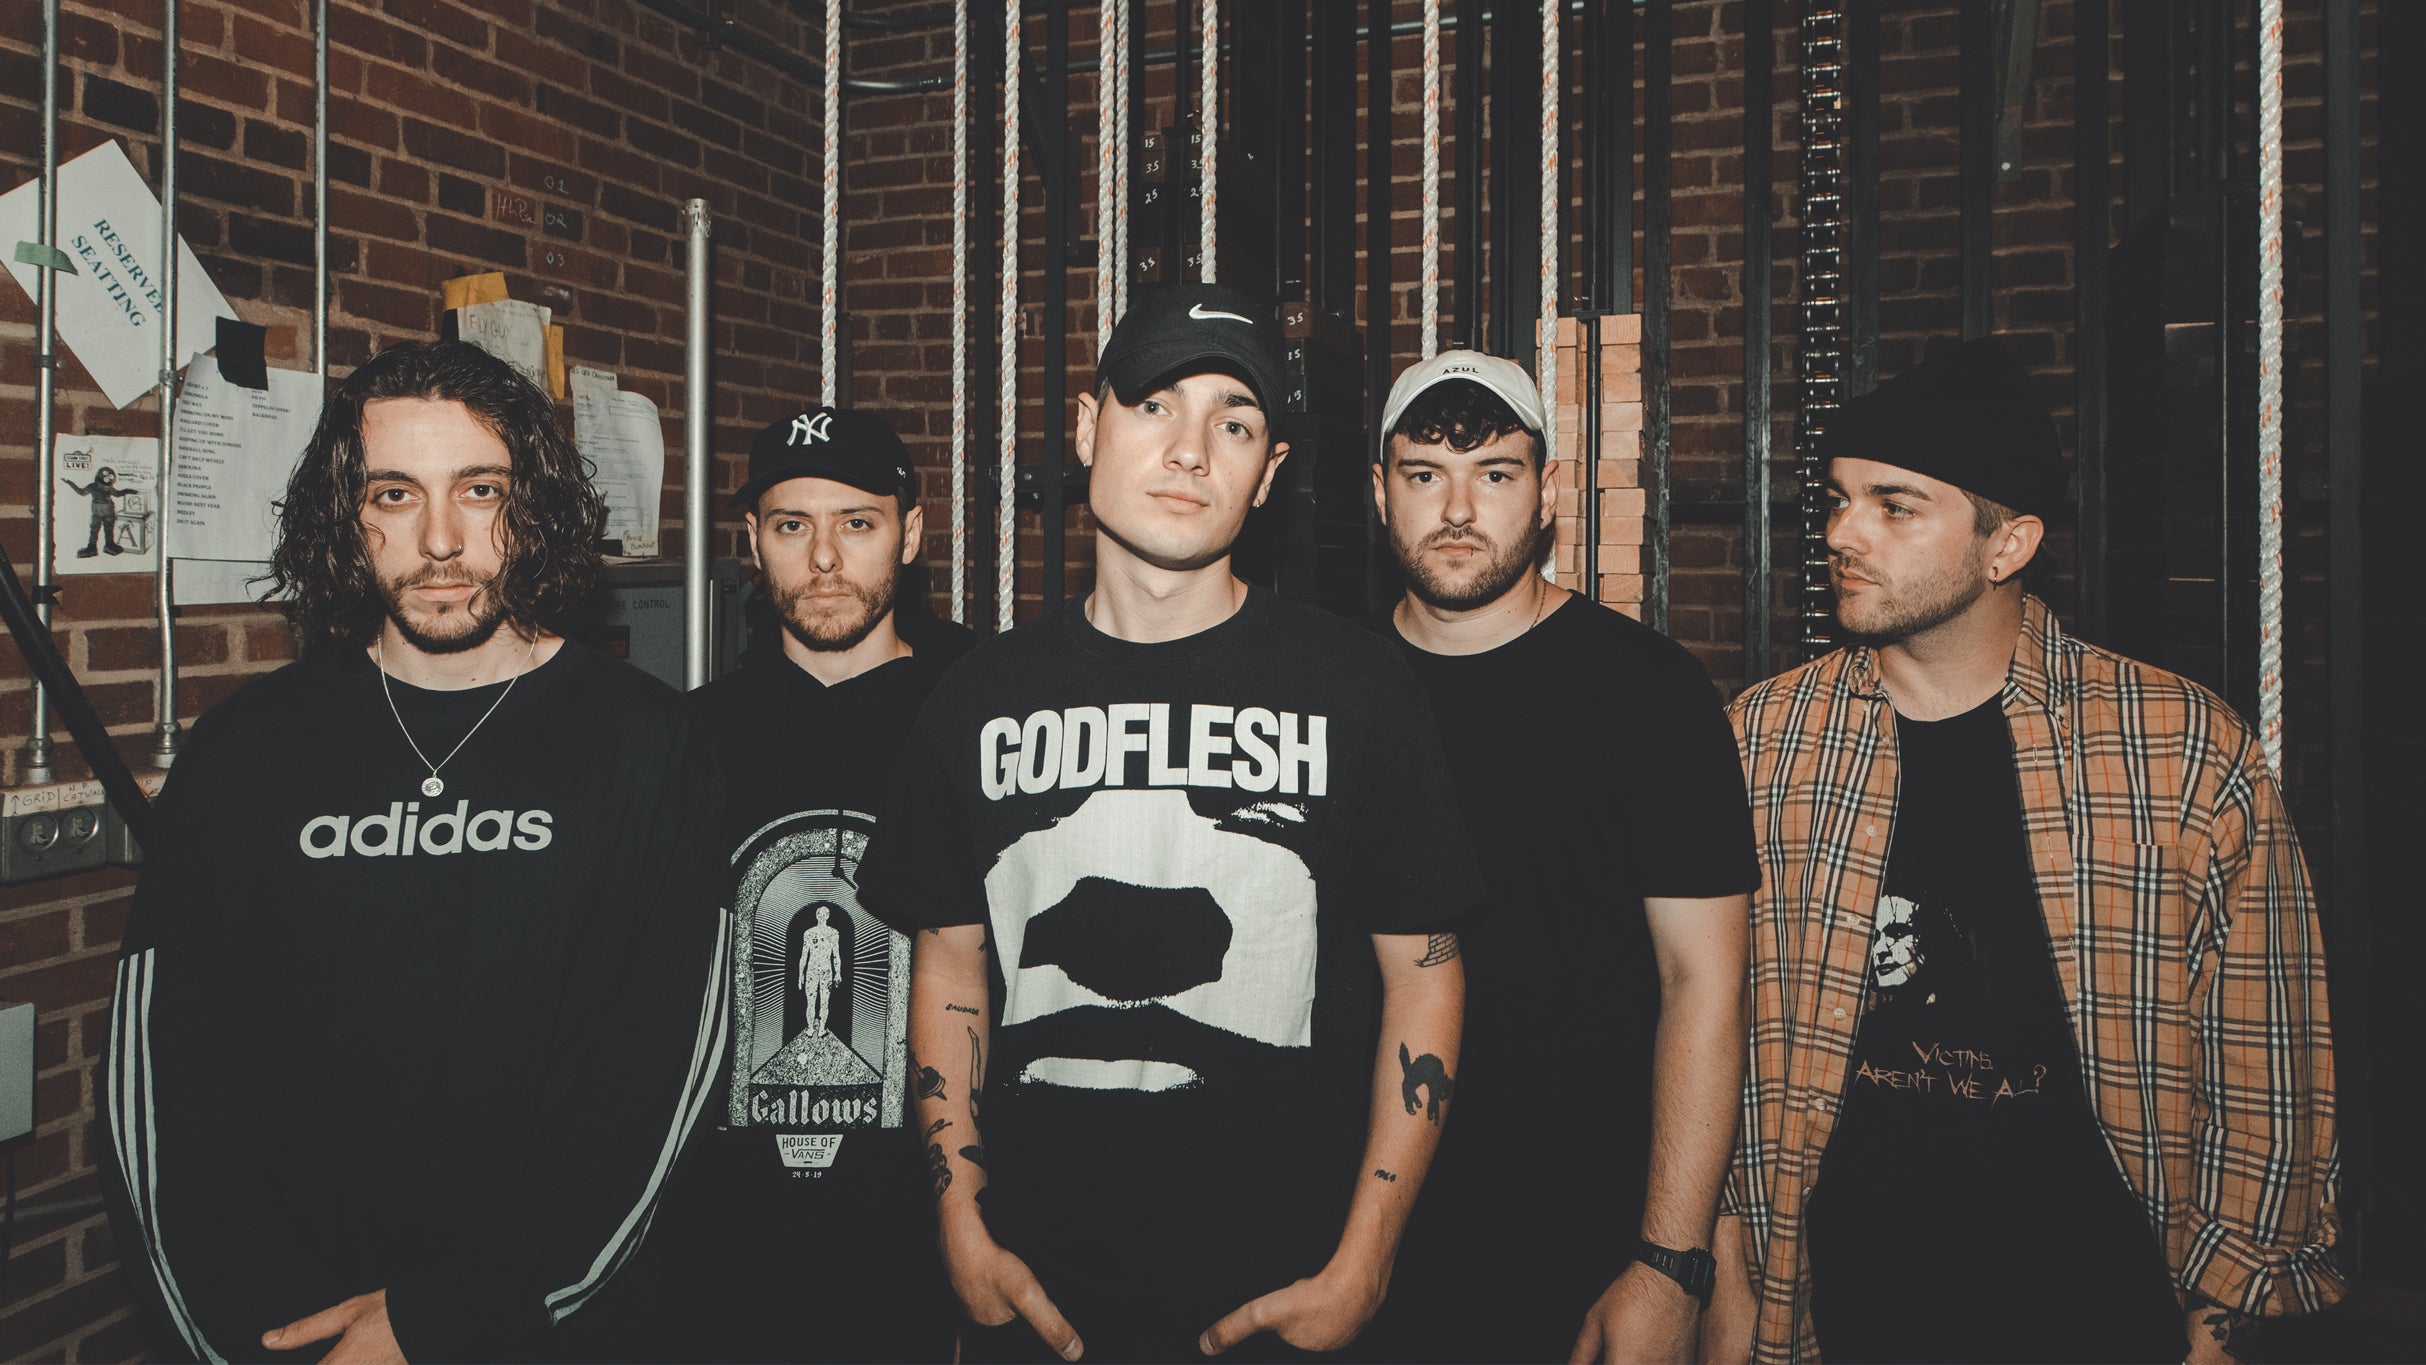 Boston Manor in Manchester promo photo for Priority from O2 presale offer code